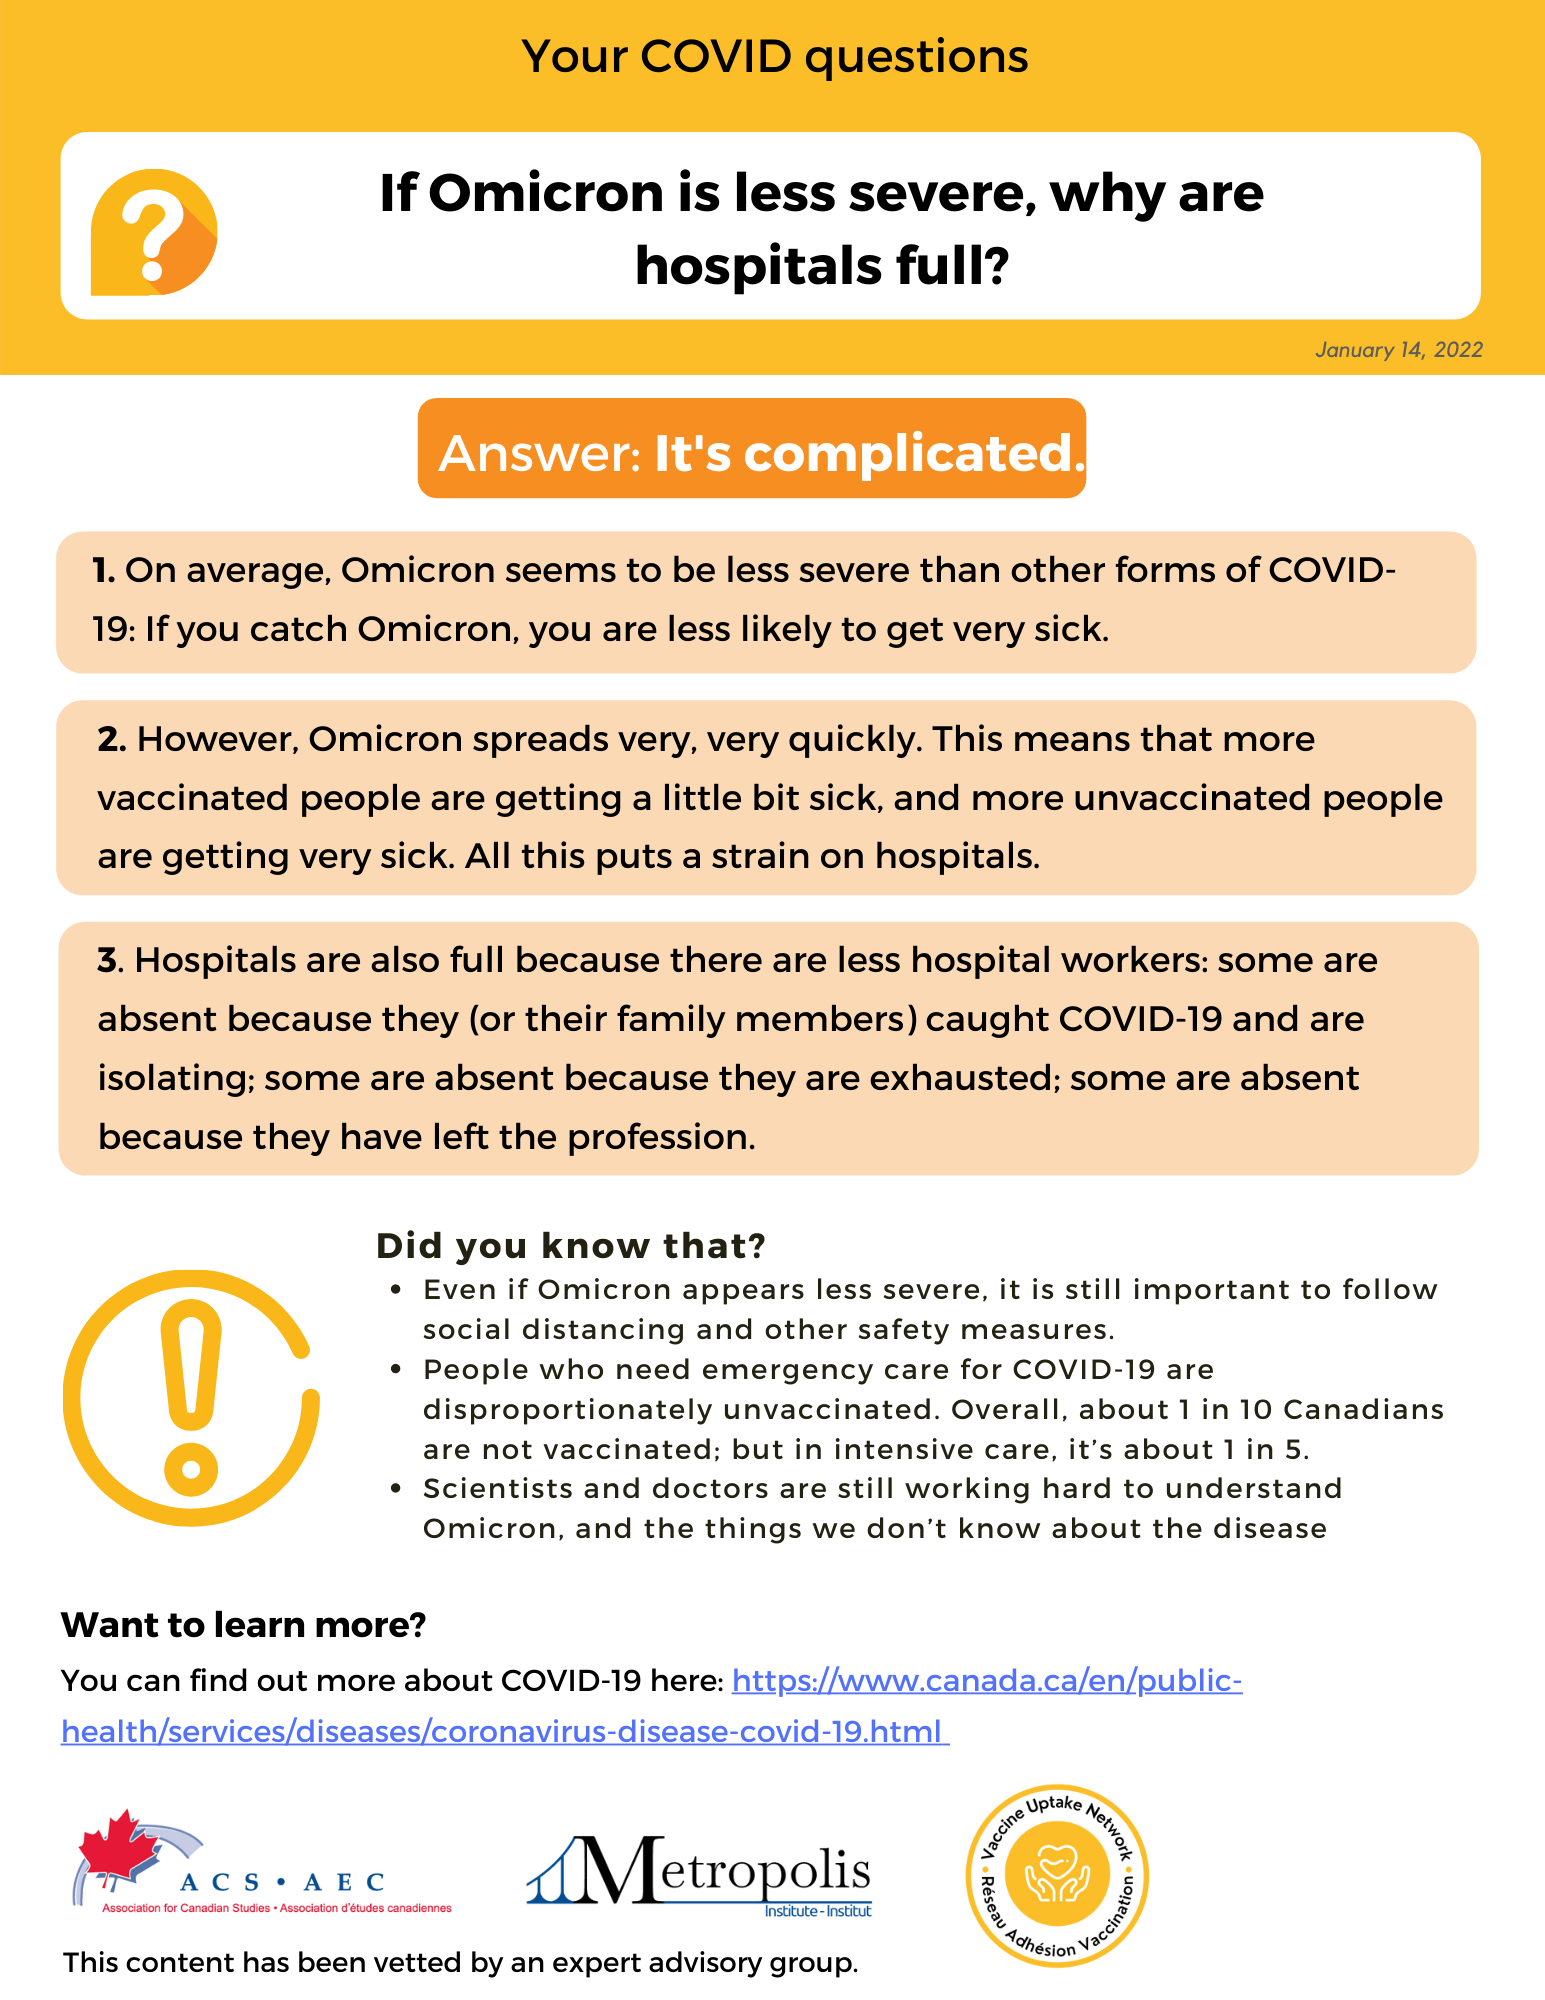 Factsheet – If Omicron is less severe, why are hospitals full?